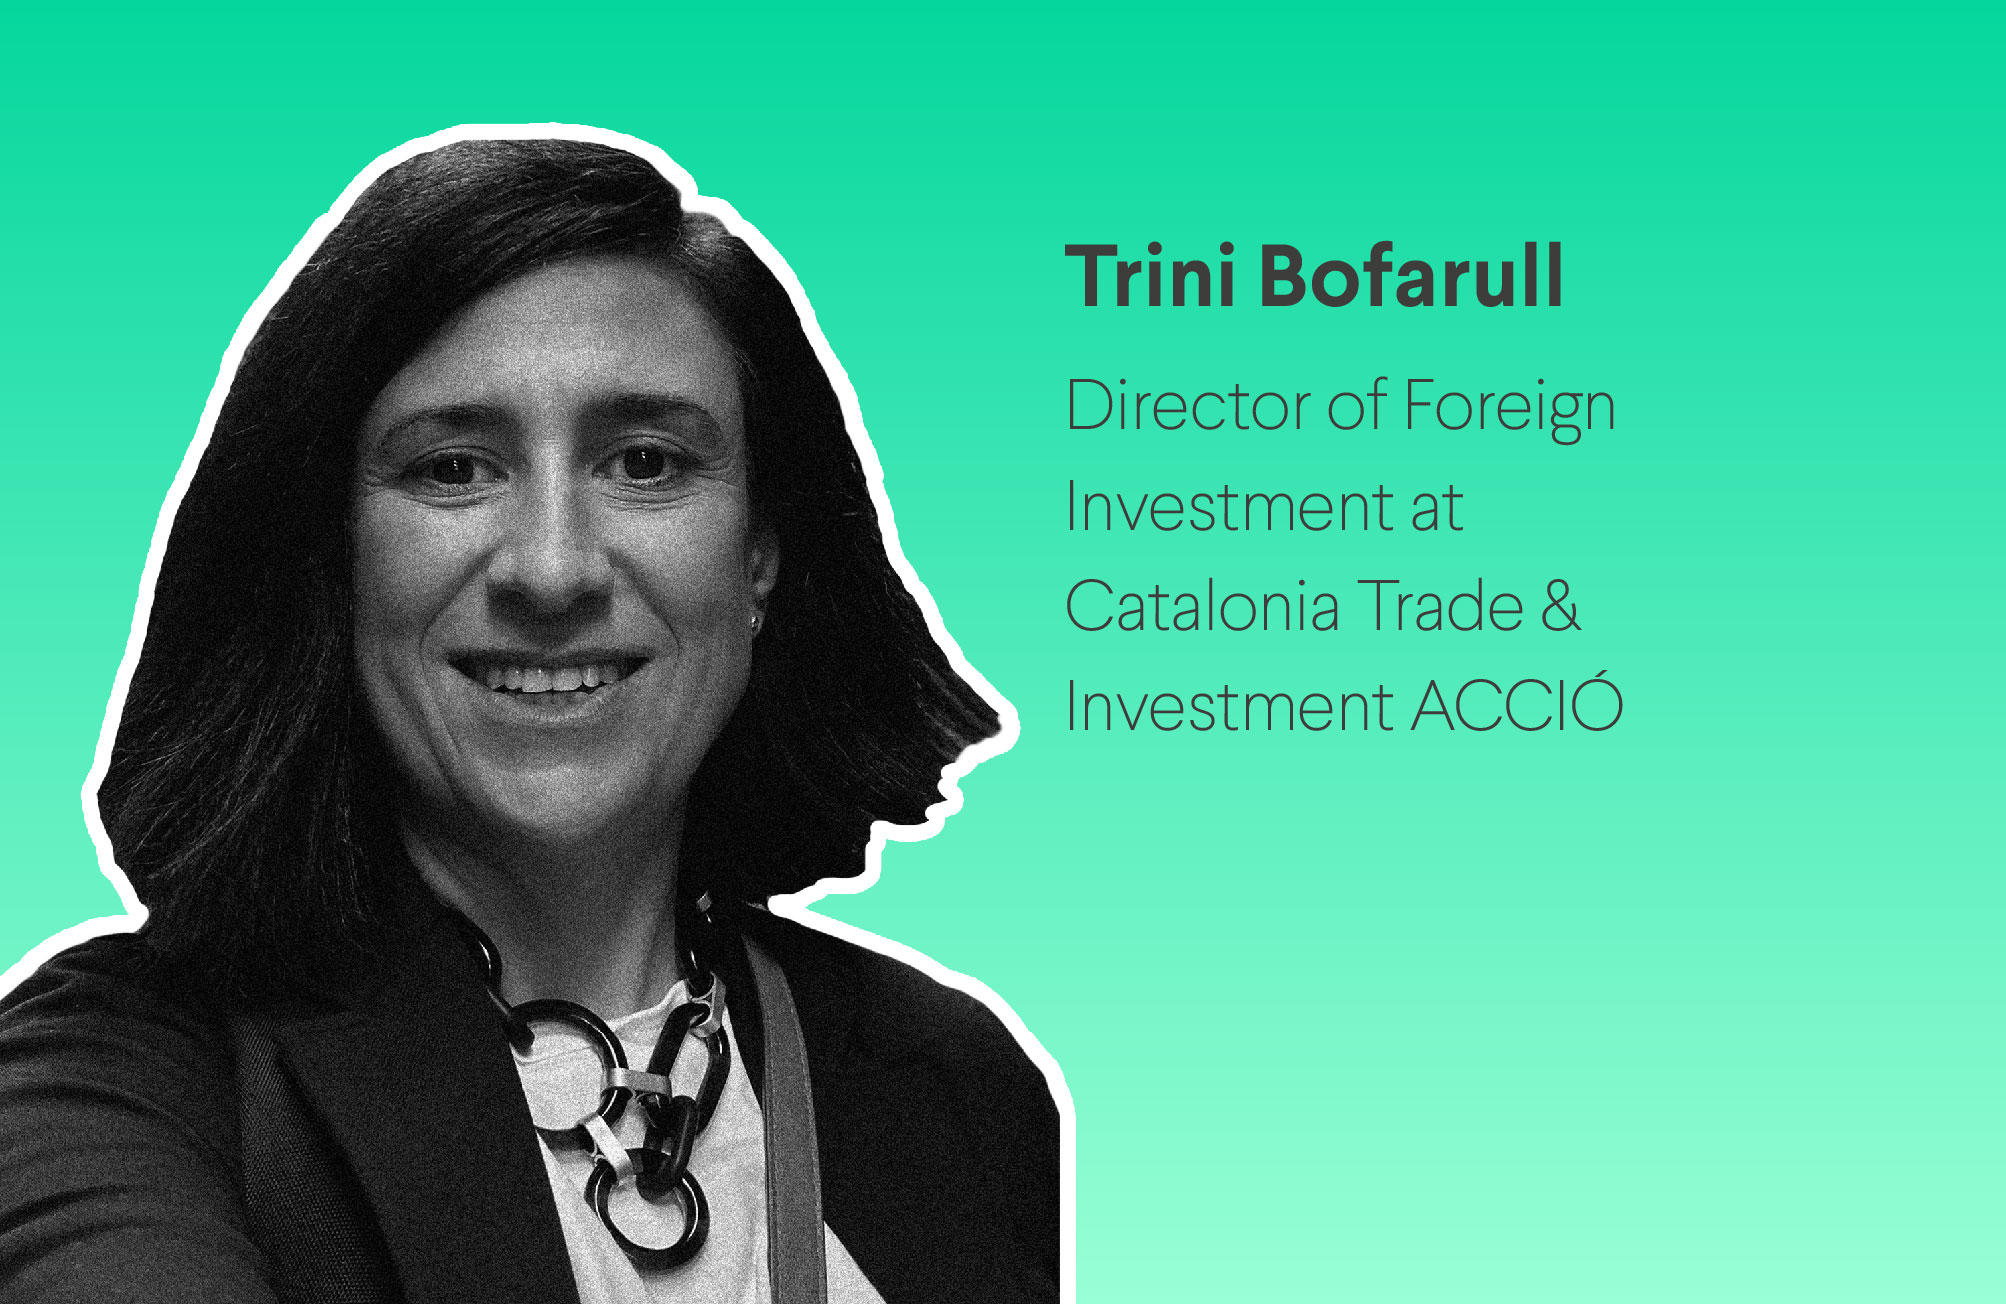 Trini Bofarull: “We present Catalonia as what it is, a technological industrial HUB where it is easy to do business”